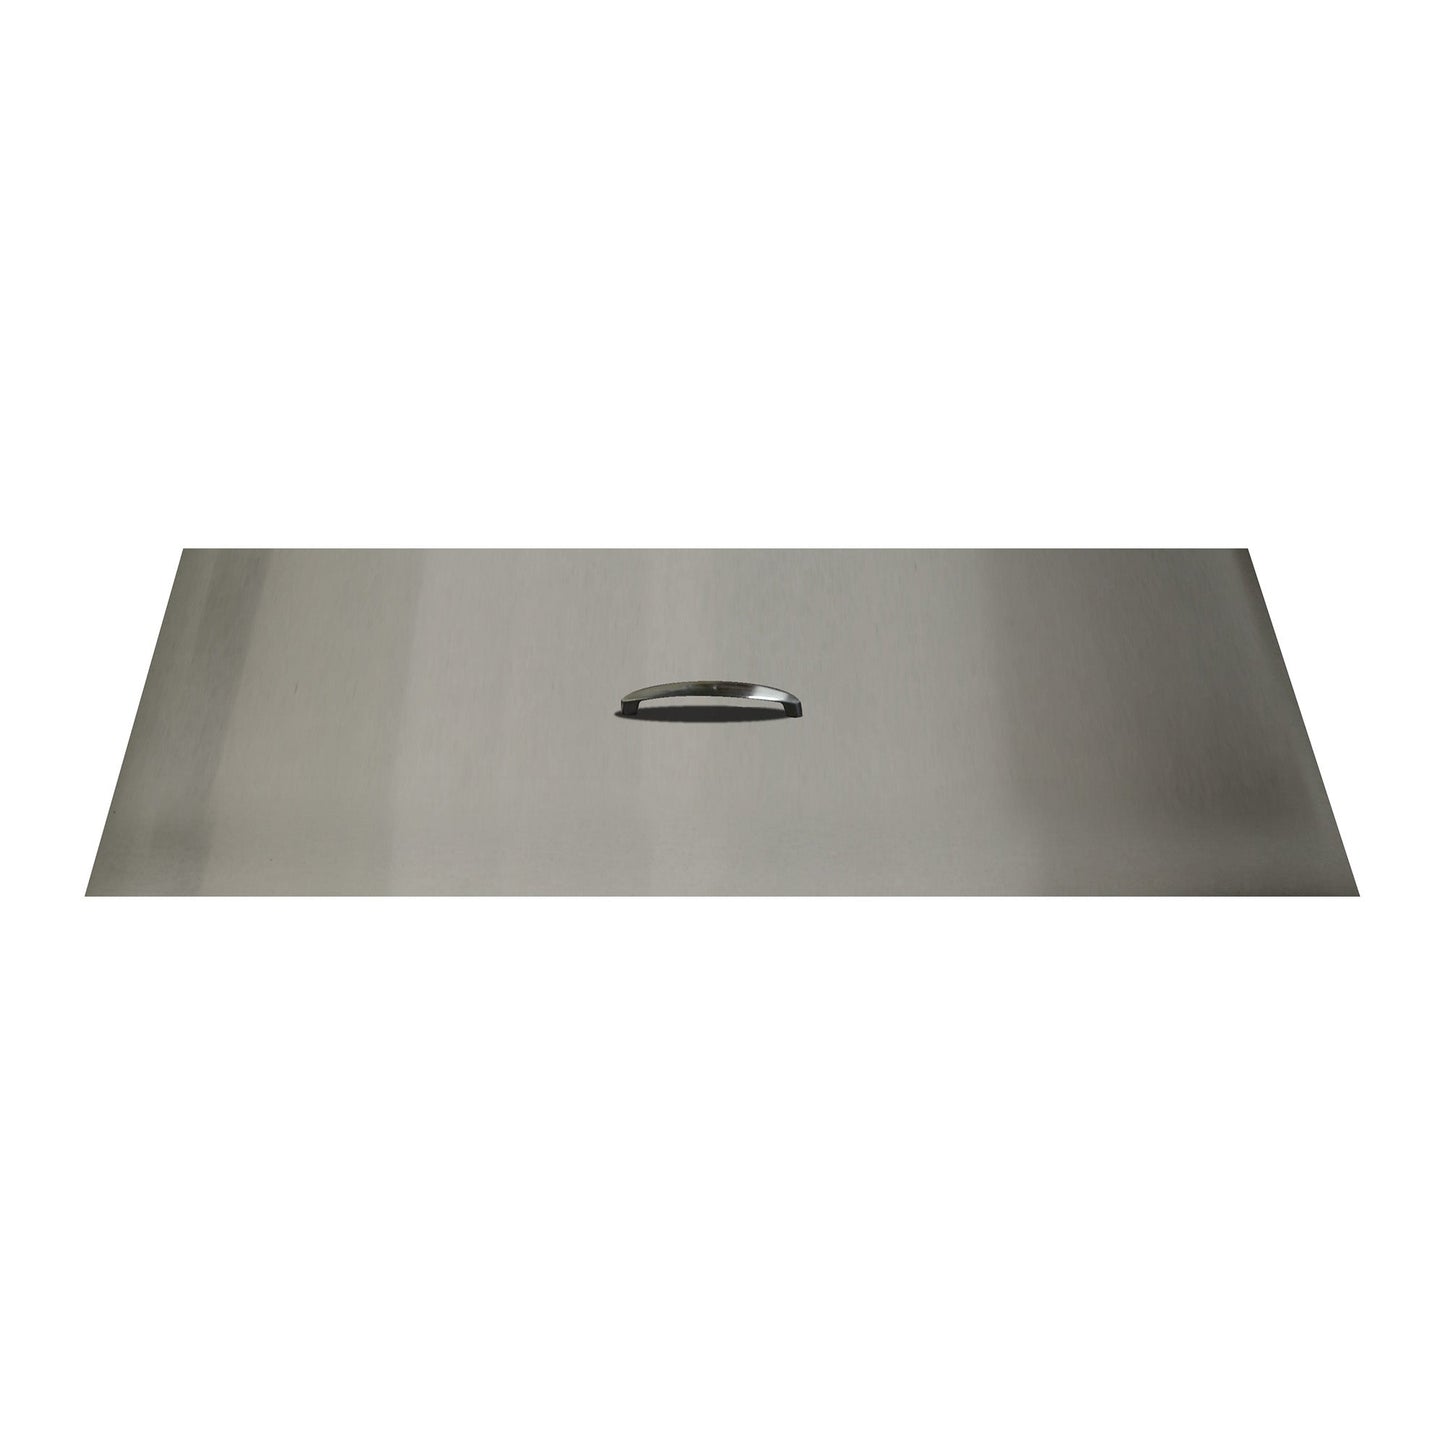 The Outdoor Plus 43" x 21" Stainless Steel Rectangular Fire Pit Lid Cover